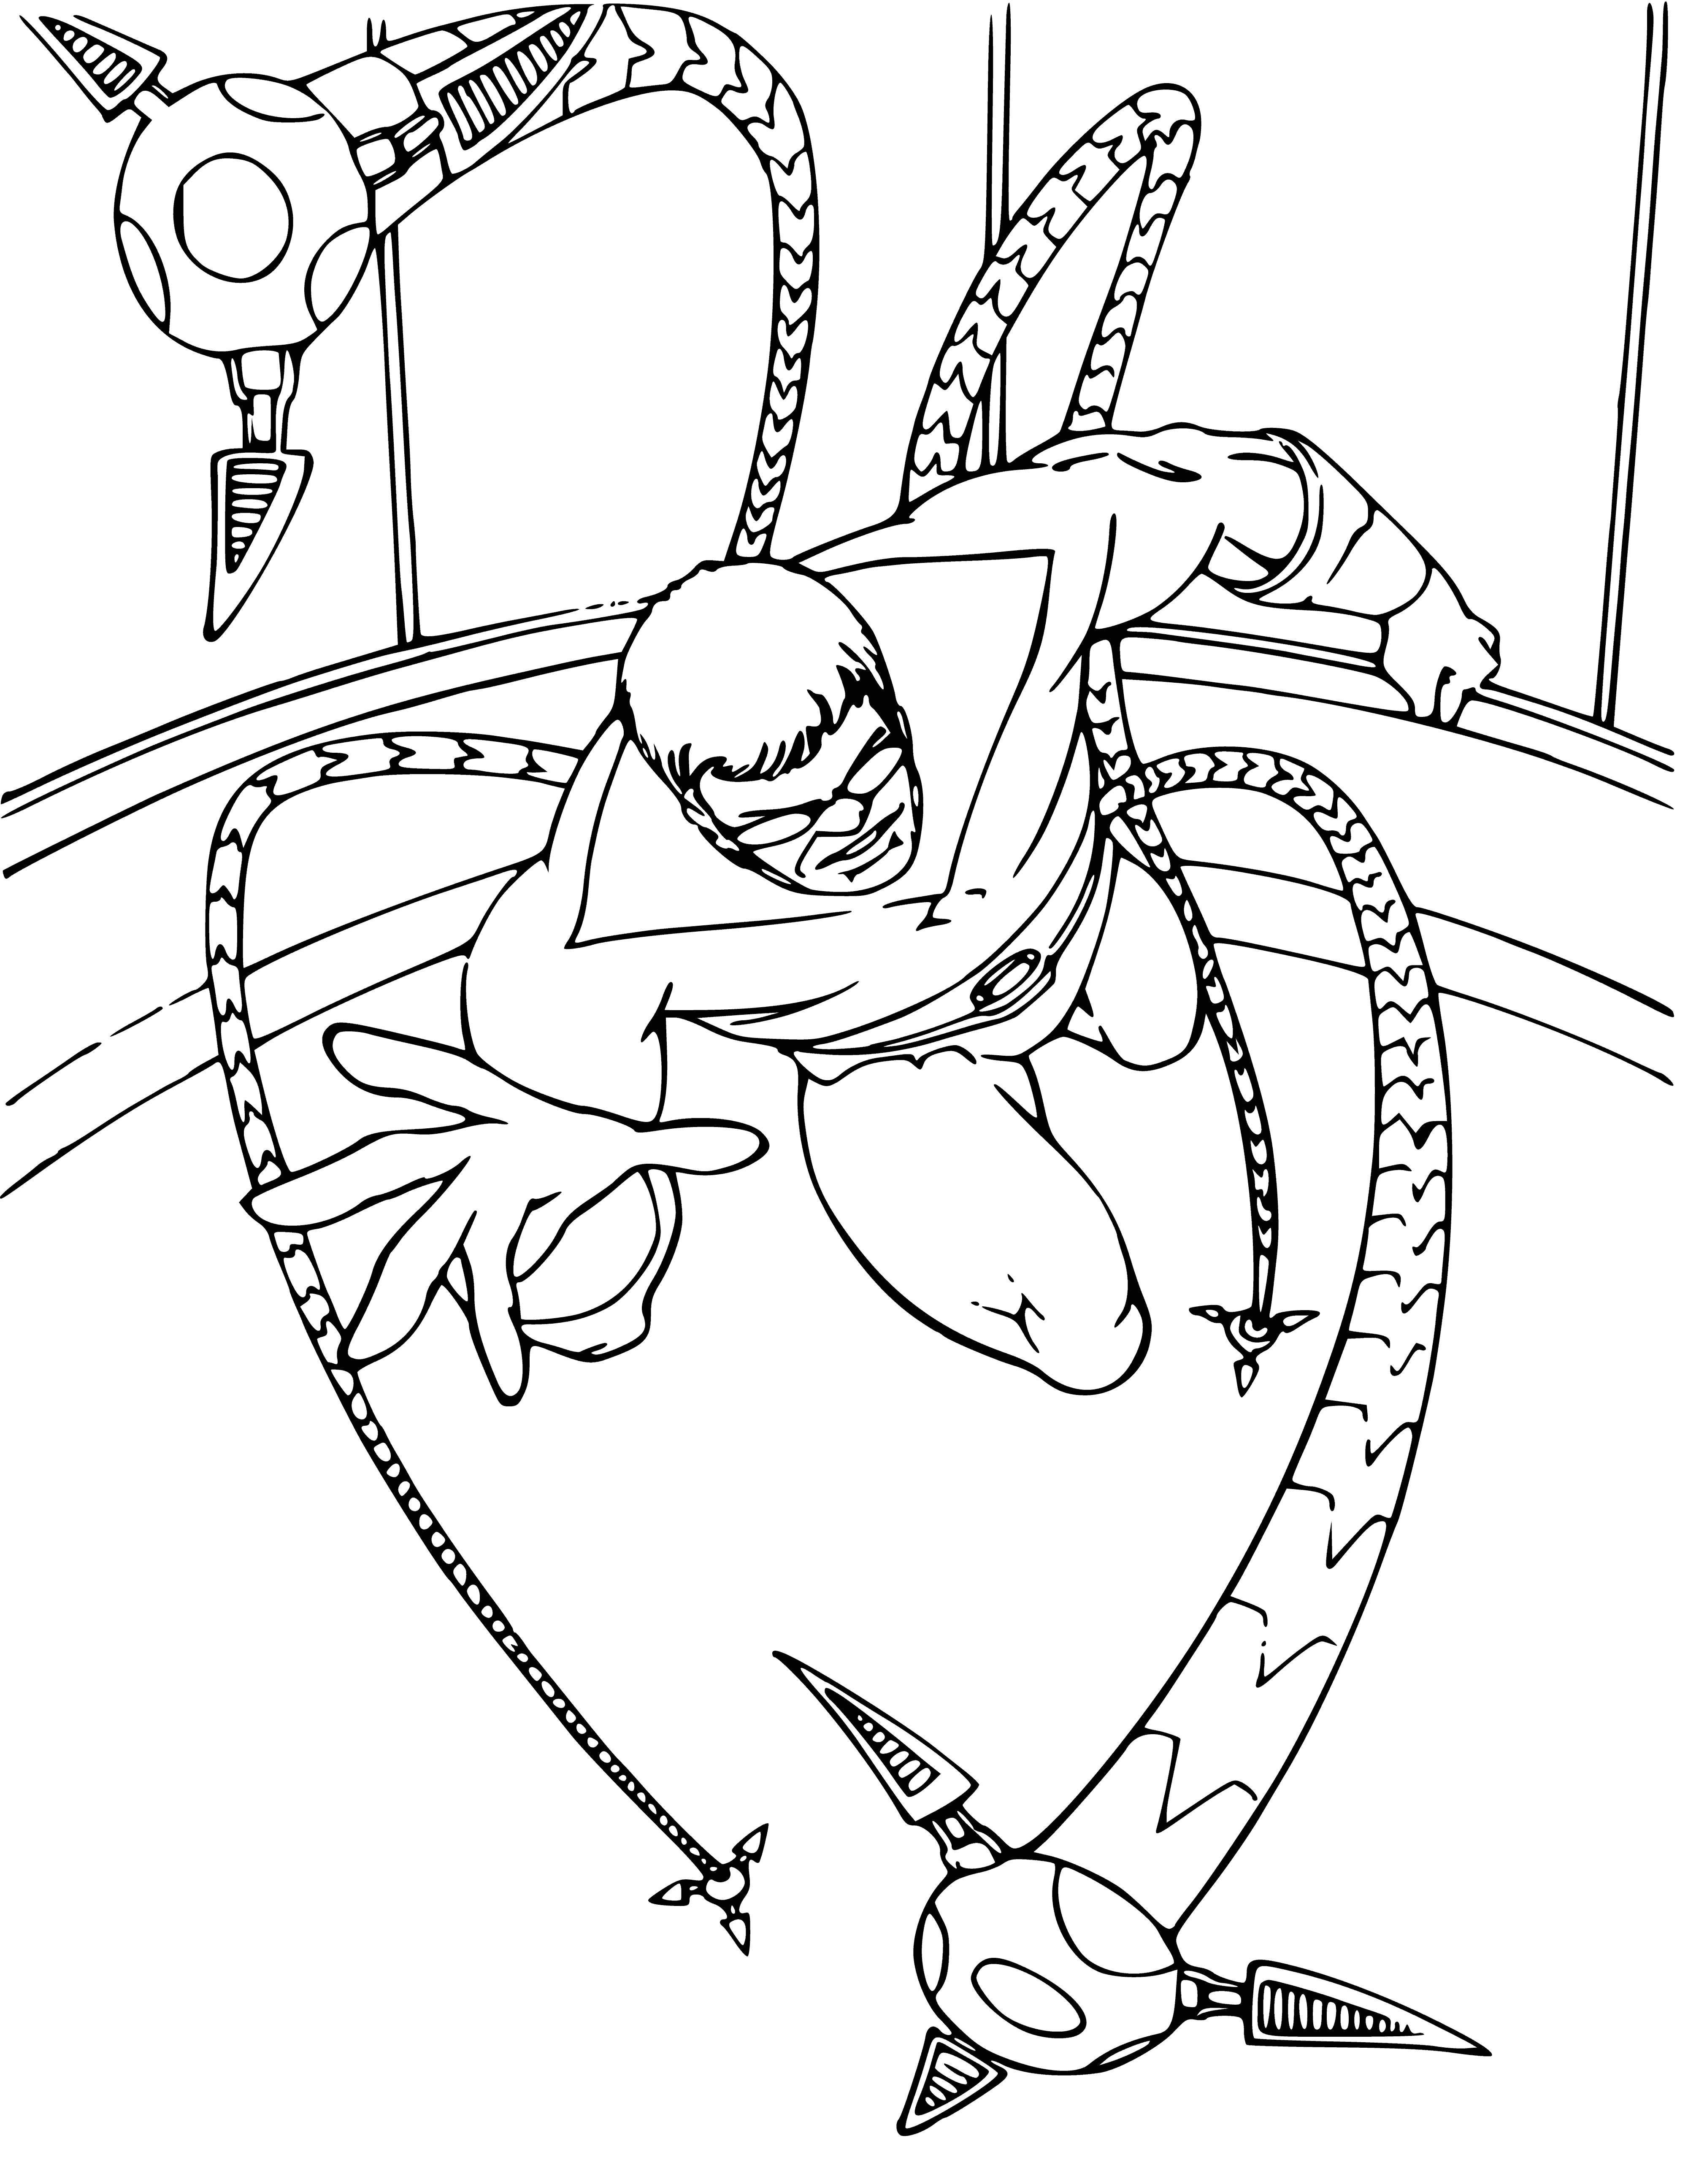 coloring page: Man in spider suit and doctor with metal tentacles fight to the death.